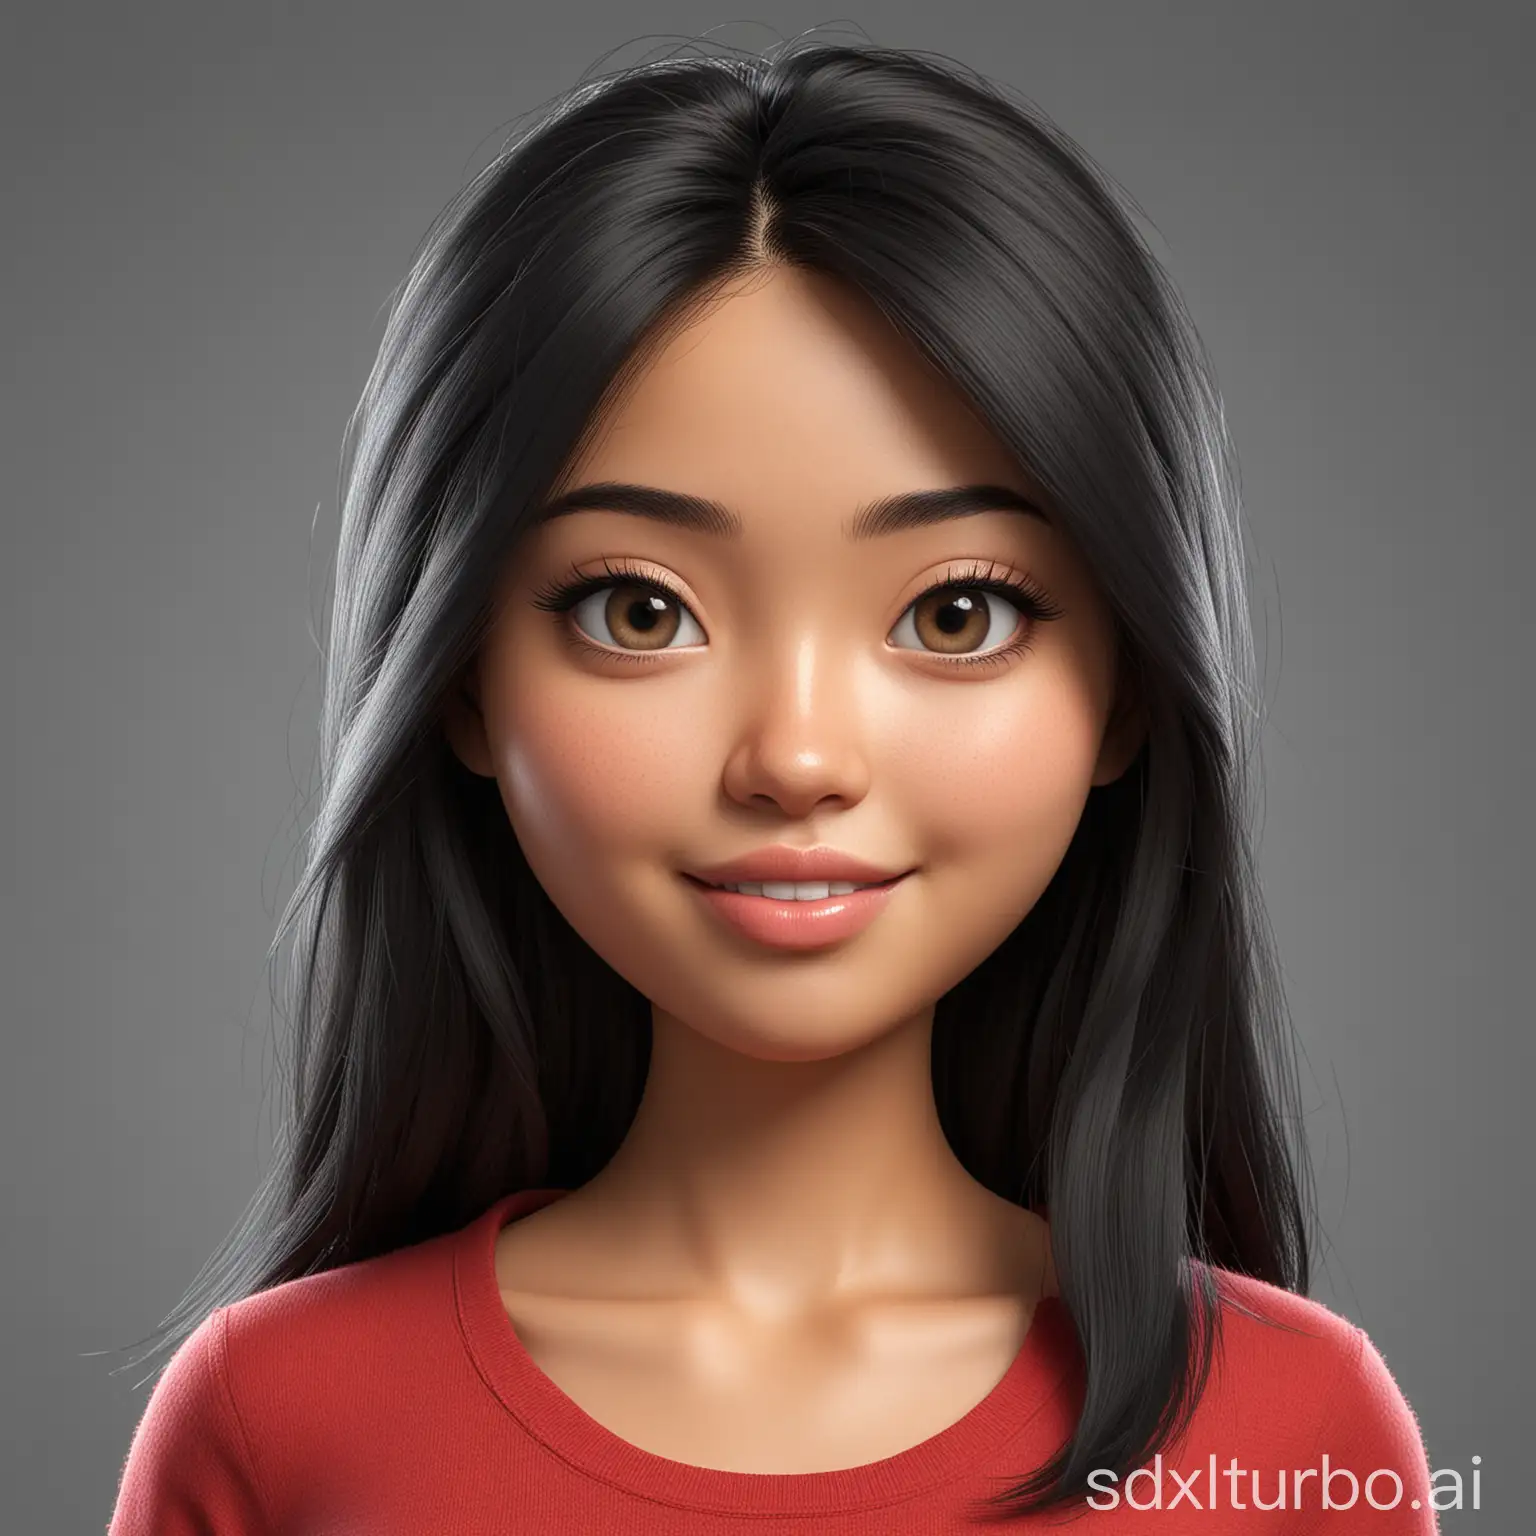 Create a full 3D cartoon style body with a big head. A 25 year old Indonesian woman. Height, ideal body, oval face shape. beautiful, slightly round eyes, clean white skin, thin sweet smile. Long black hair with shagy layers. Wearing a red shirt. Body position is clearly visible. The background is solid white. Use soft photography lighting, hair lighting, top lighting, side lighting. Highest quality photos, Uhd,16k